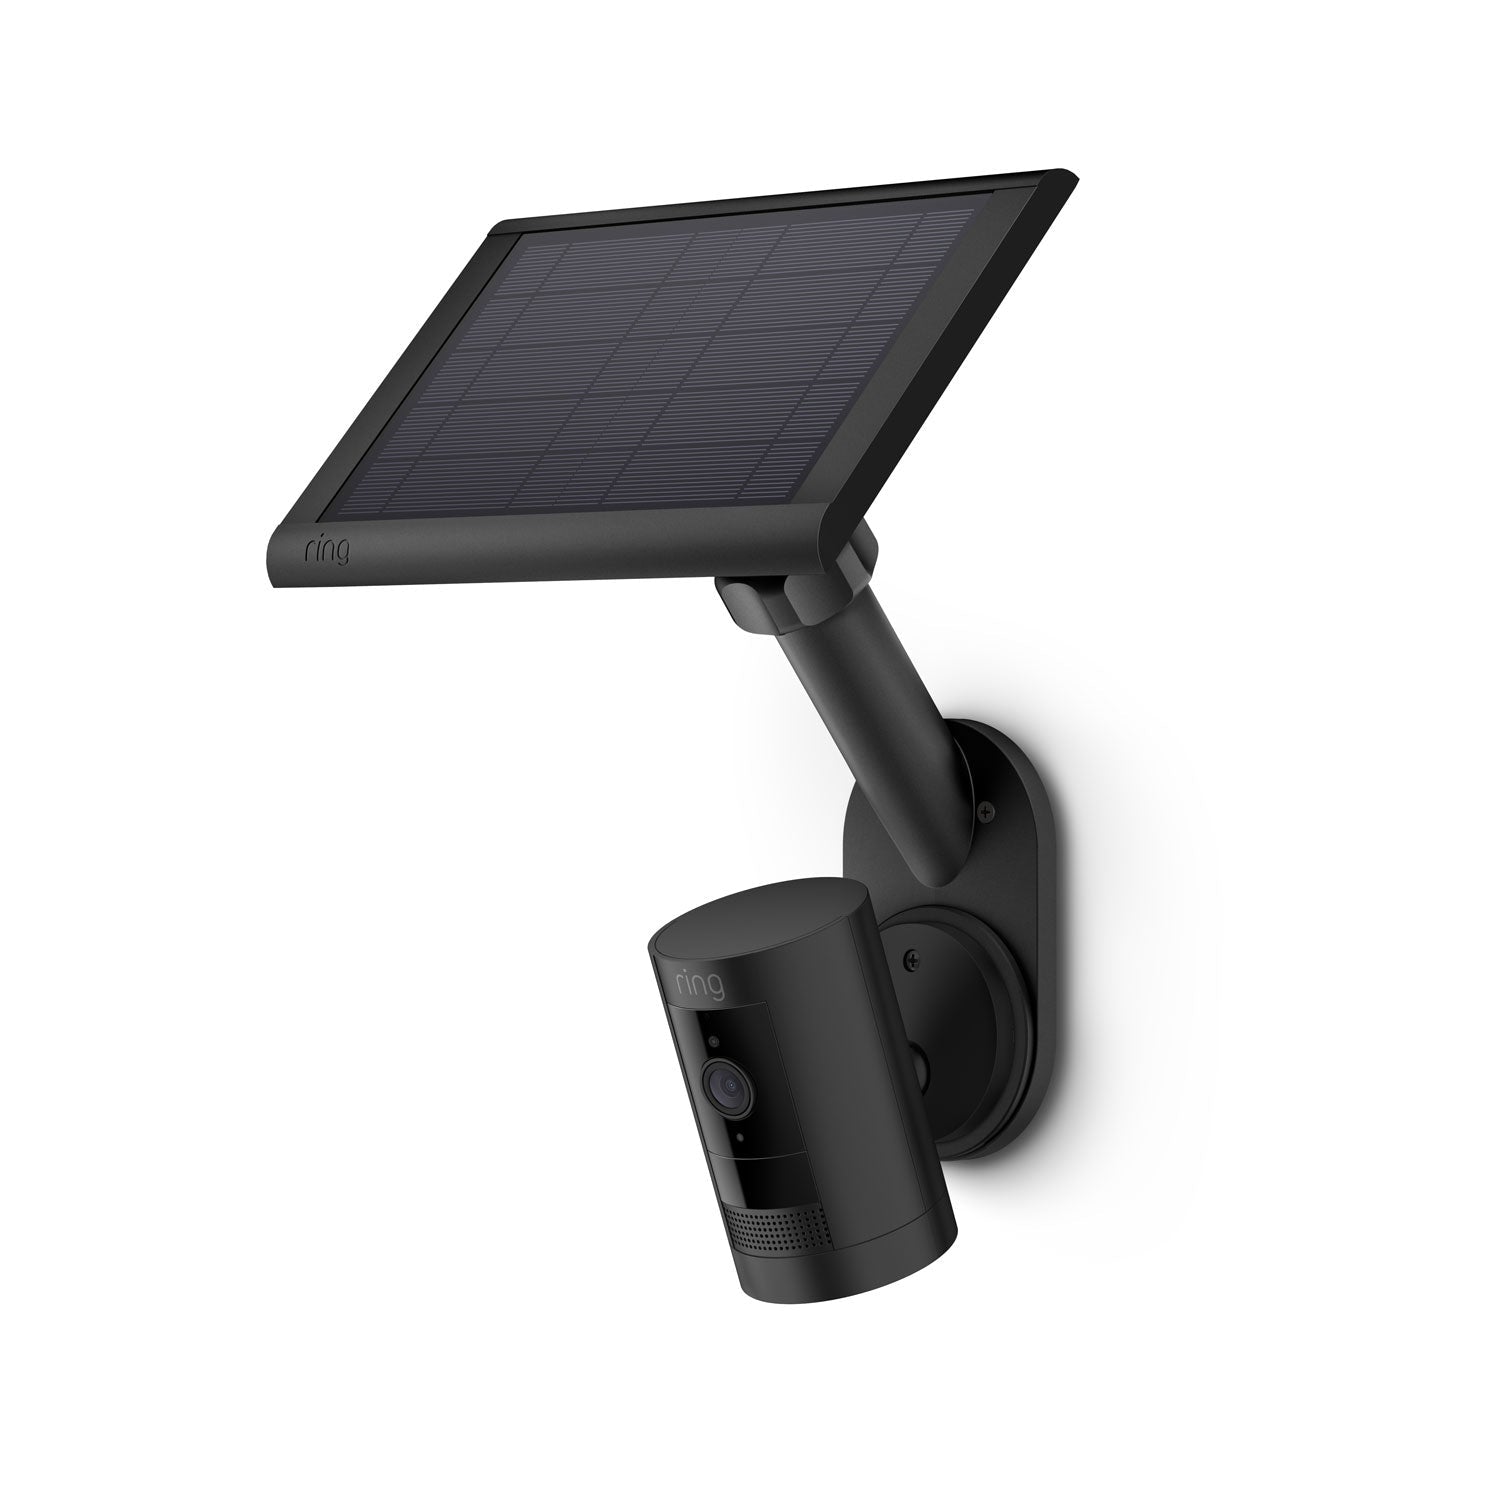 Wall Mount for Solar Panels and Cams - Wall Mount for Solar Panels and Cams in black with Spotlight Cam attached.